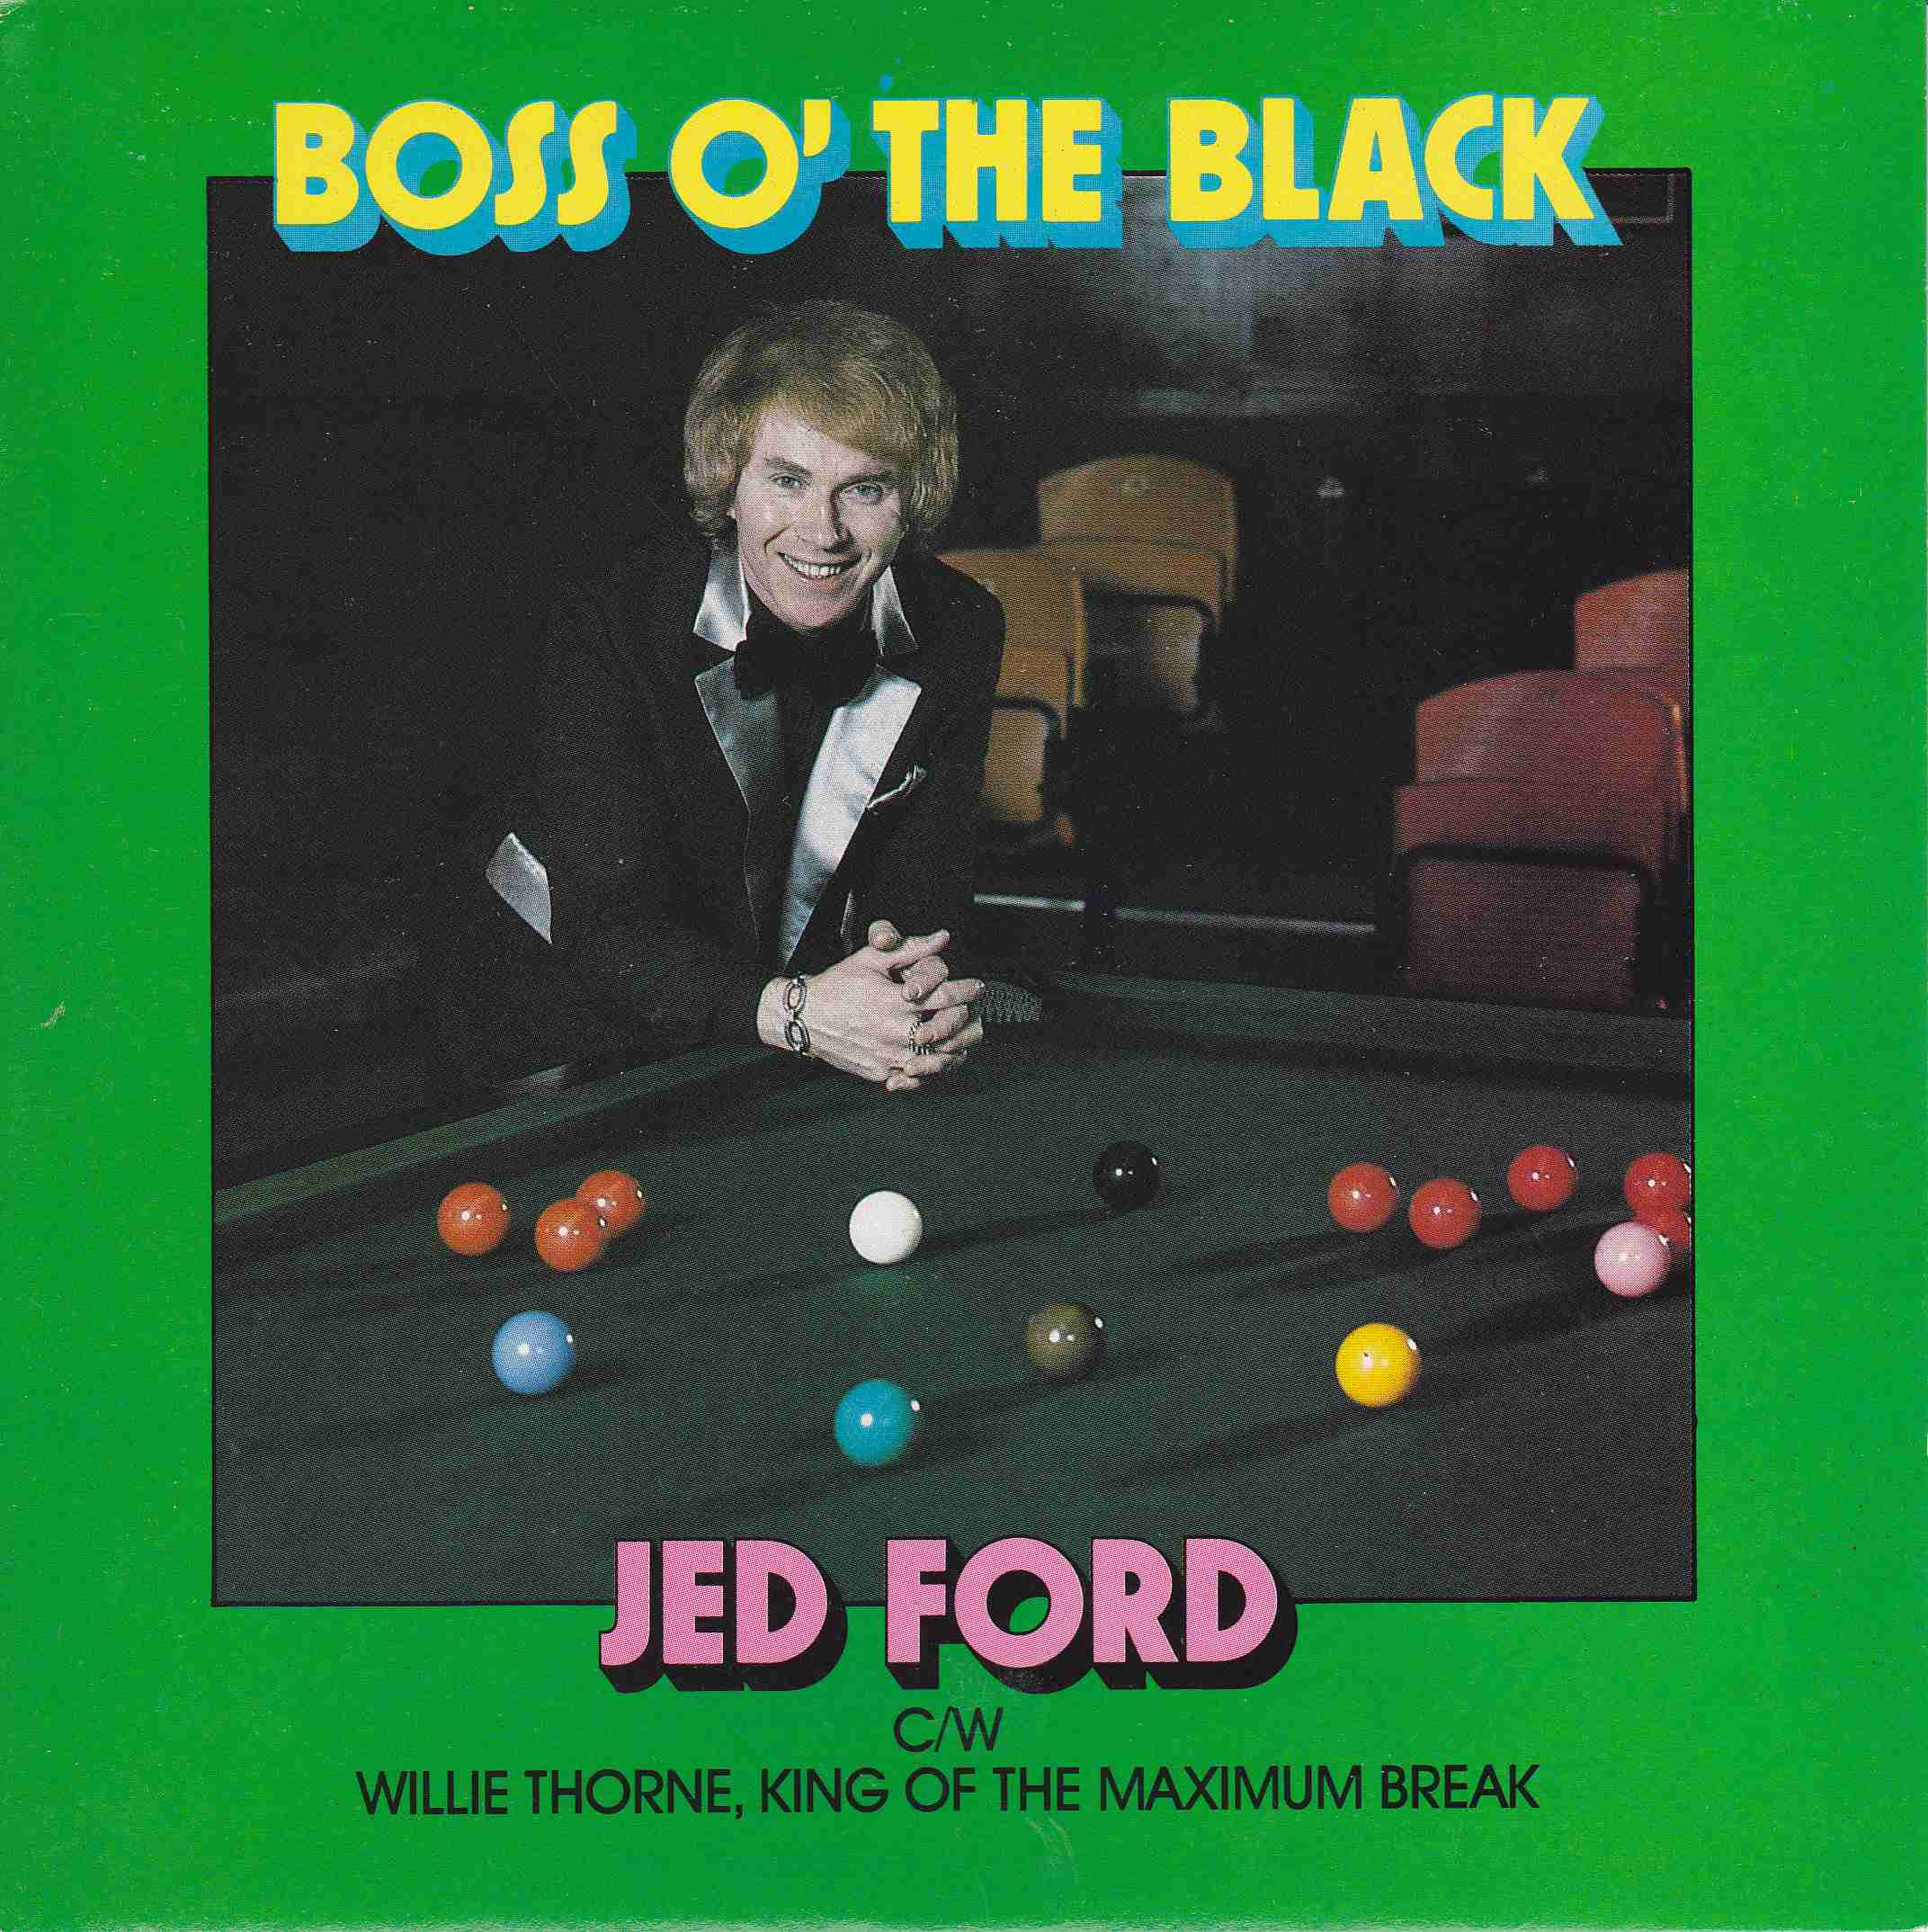 Picture of RESL 187 Boss o' the black by artist Jed Ford from the BBC records and Tapes library